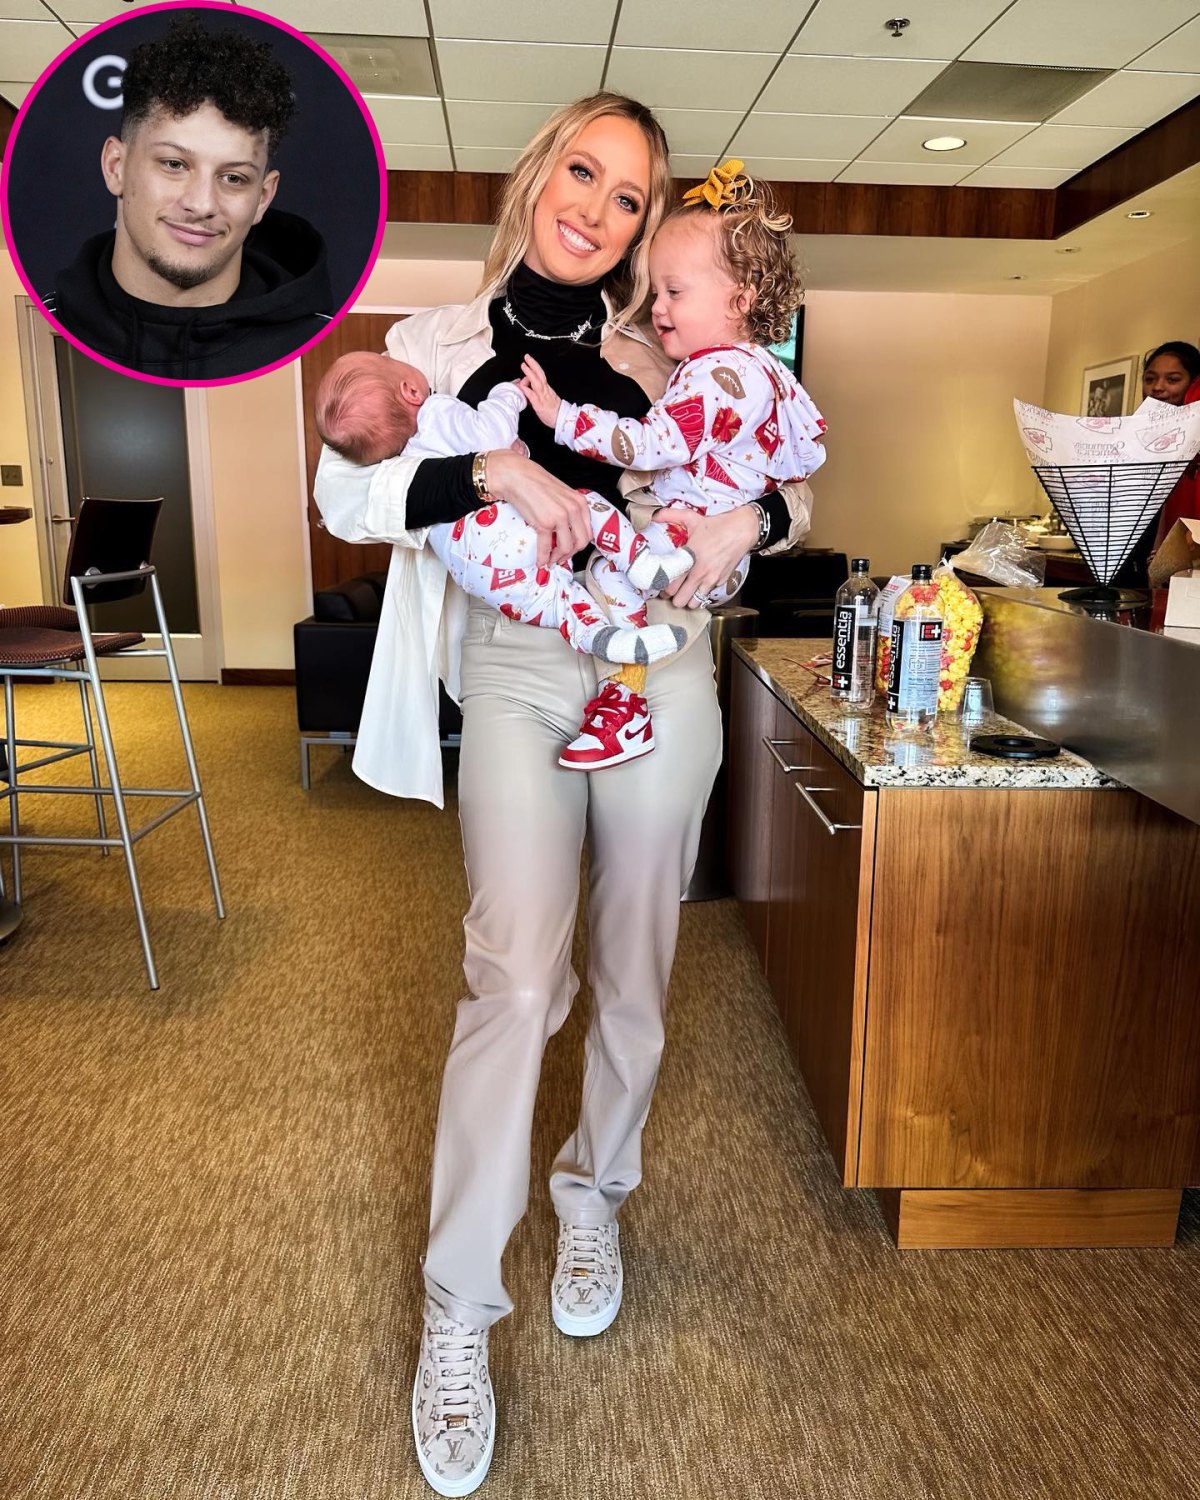 Too Cute! Chiefs' Patrick Mahomes shows off new puppy